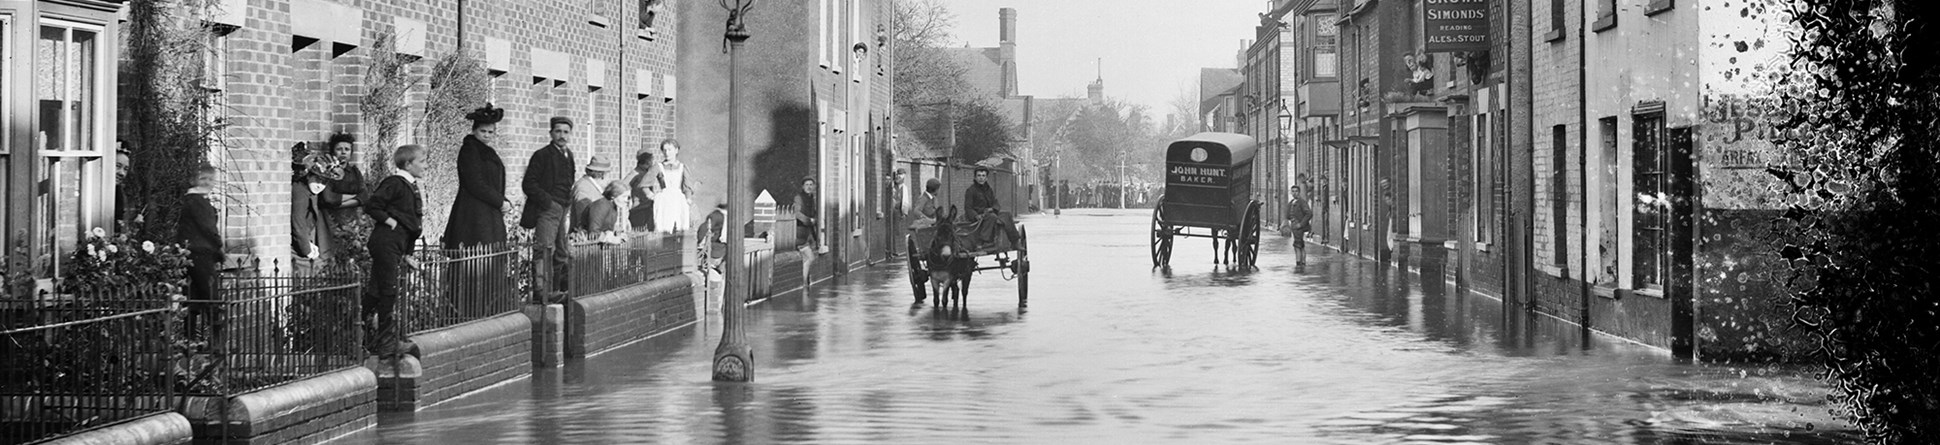 Henry Taunt's 1890 photo of flooding in Oxford